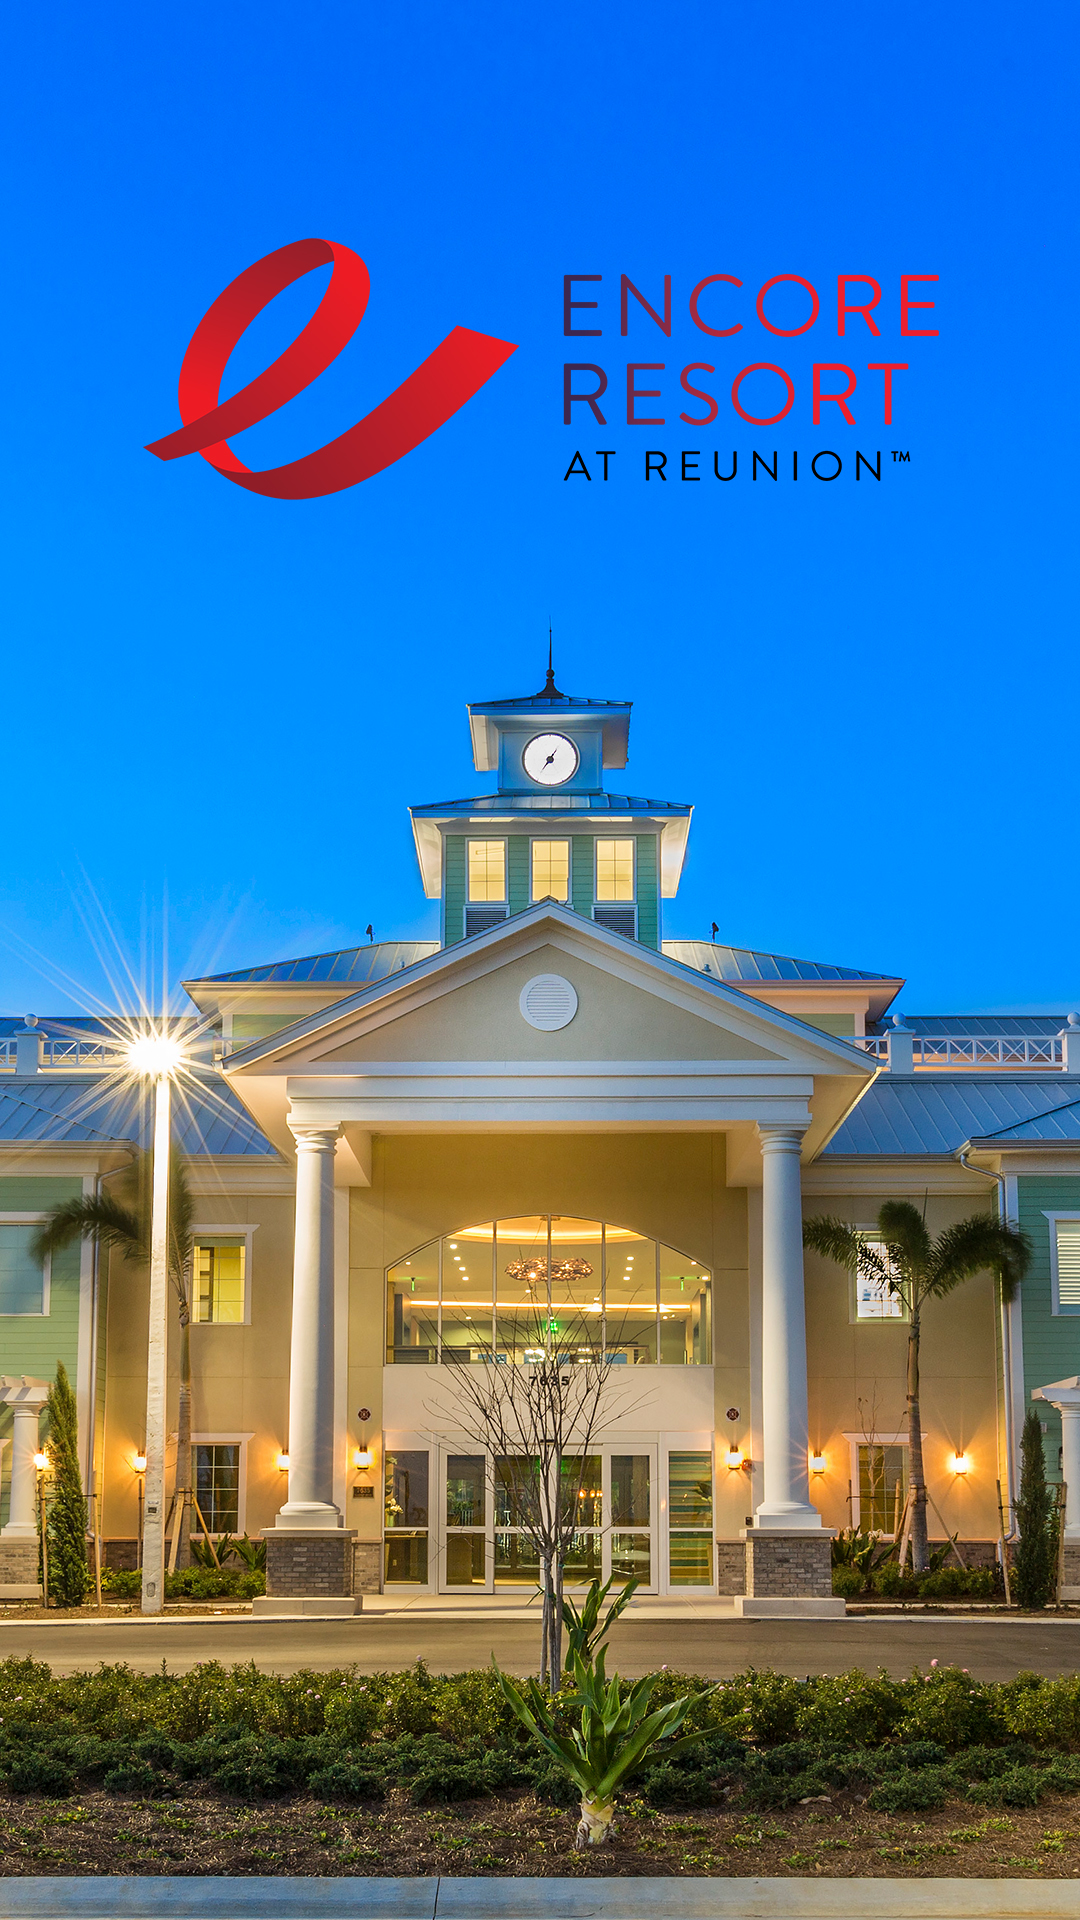 Mobile wallpaper featuring the Encore Resort Clubhouse at twilight.